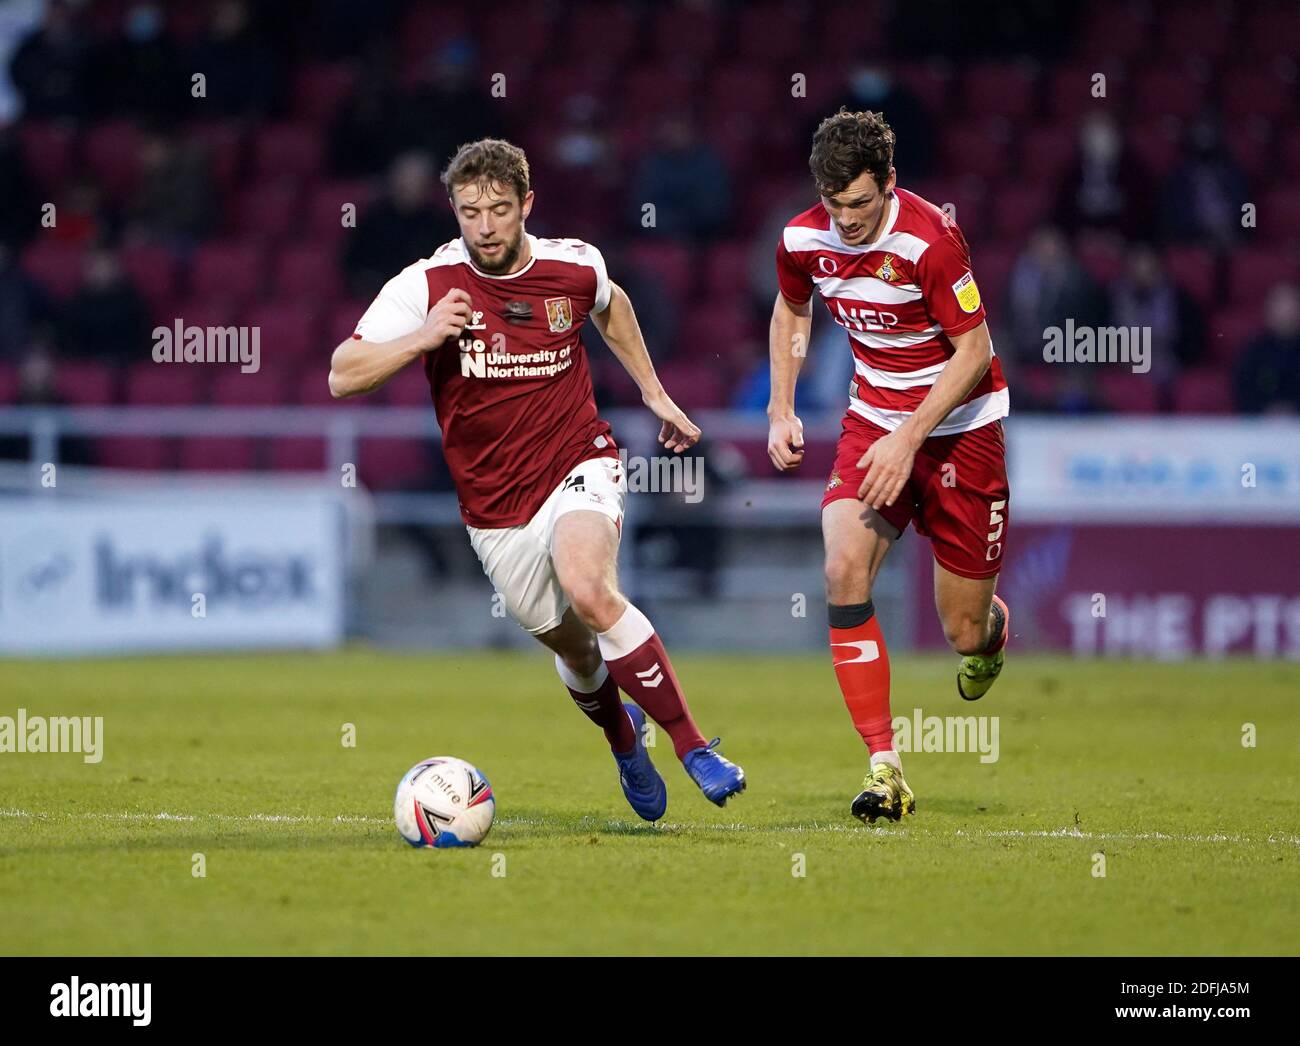 Northampton Town's Jack Sowerby (left) and Doncaster Rovers' Joe Wright battle for the ball during the Sky Bet League One match at PTS Academy Stadium, Northampton. Stock Photo